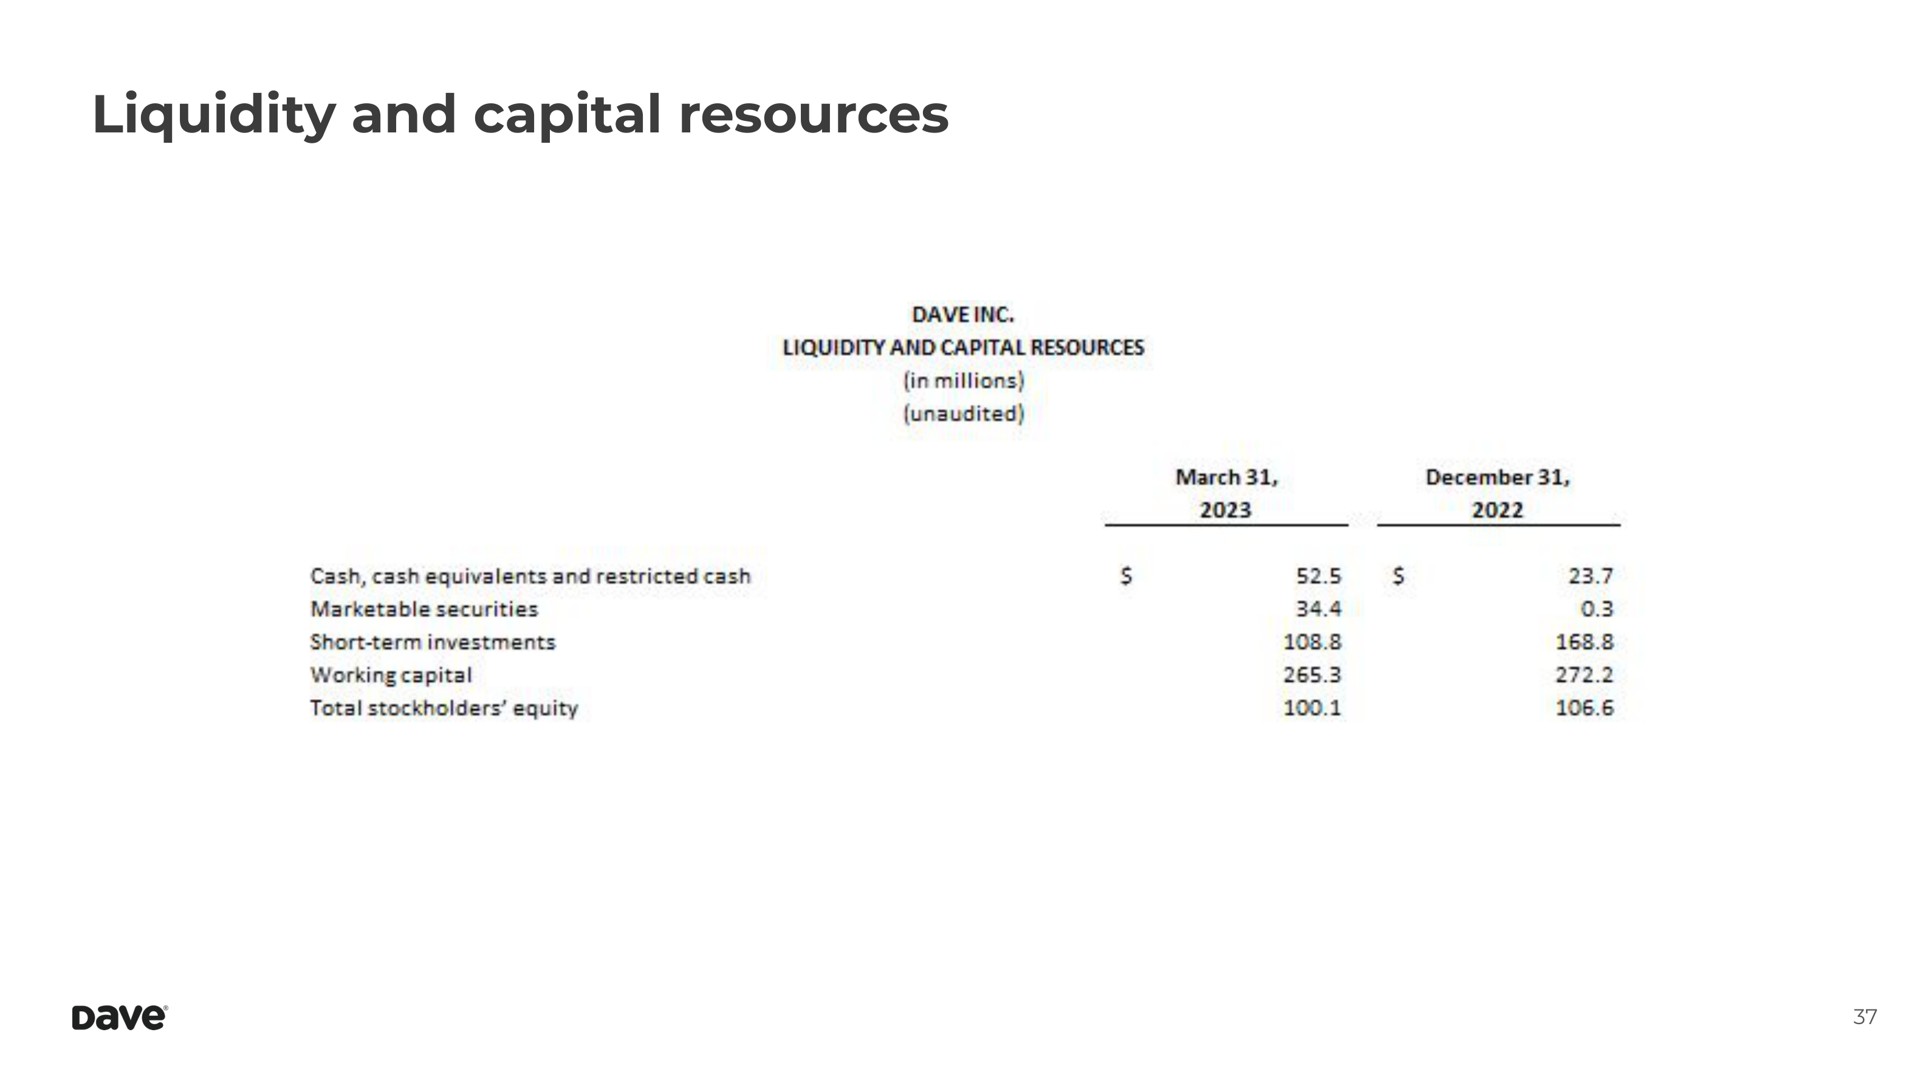 liquidity and capital resources | Dave